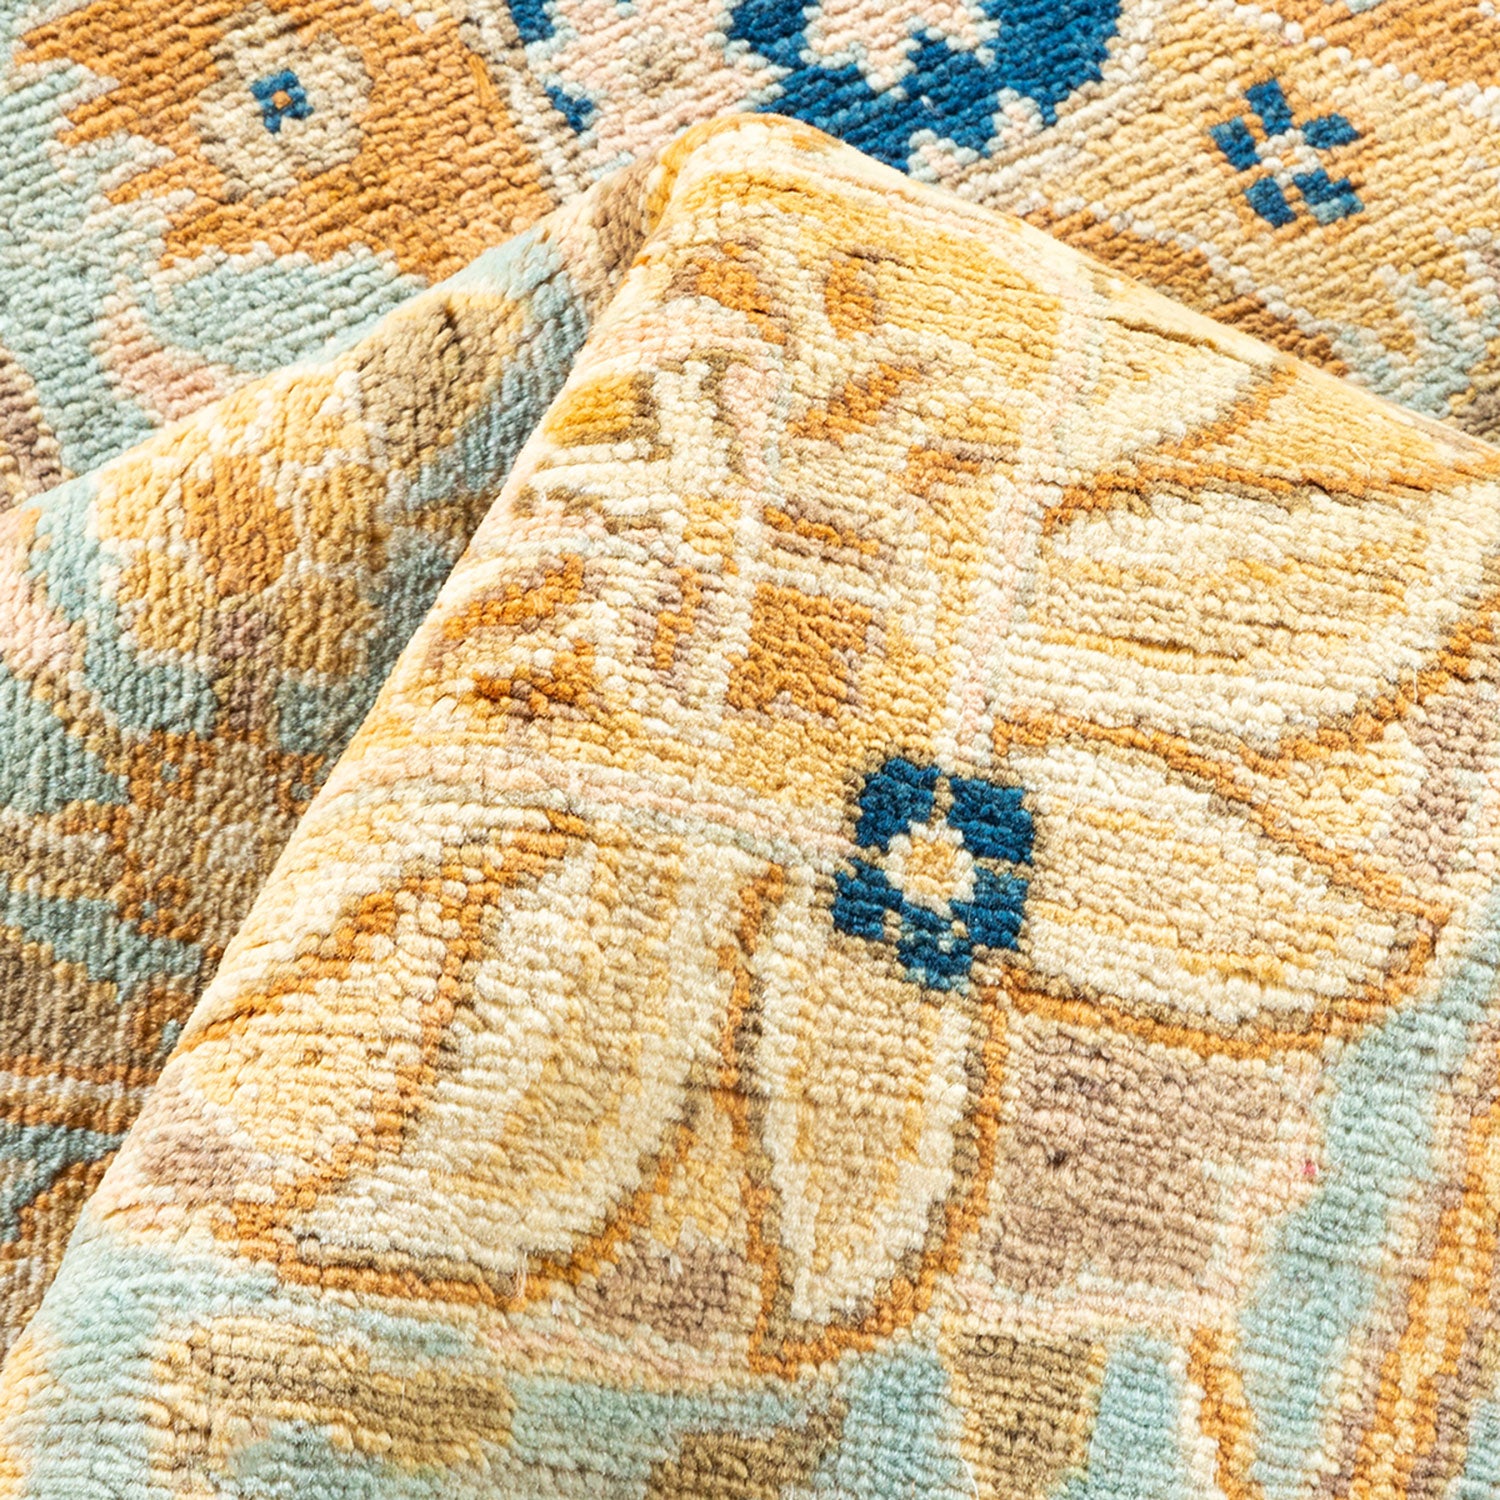 Close-up of a patterned carpet with folded corner showcasing design